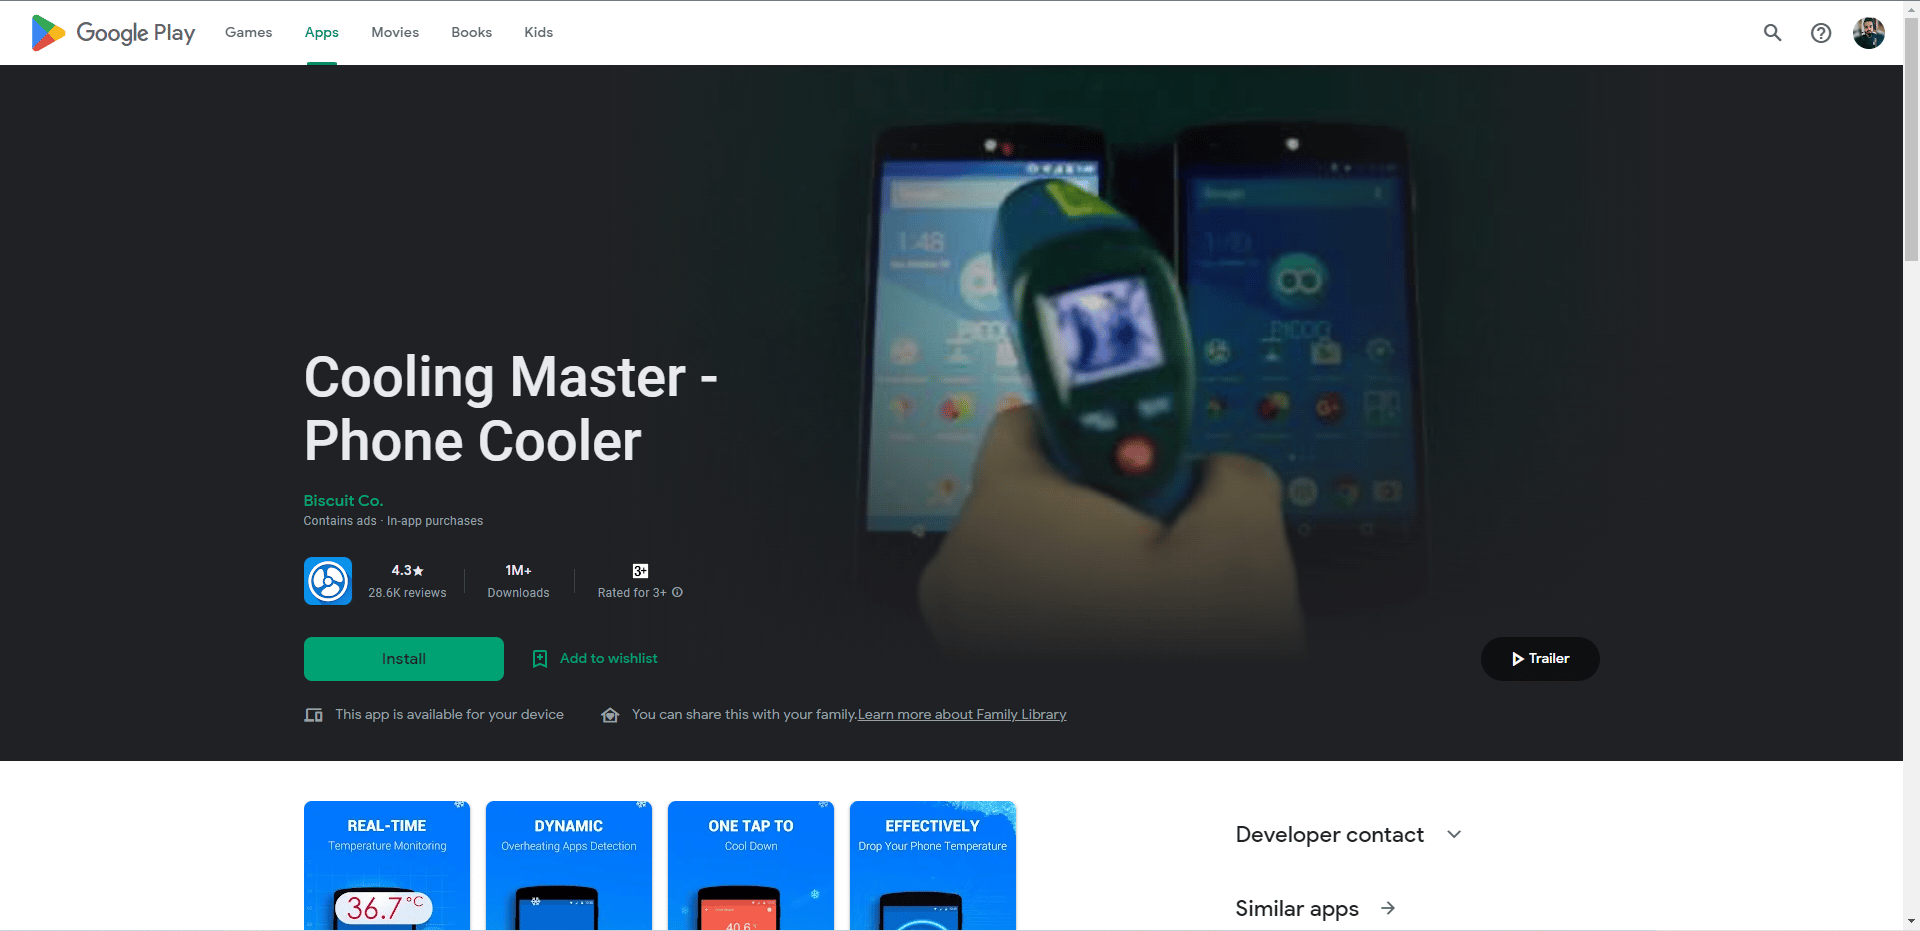 Cooling Master Phone Cooler playstore webpage 